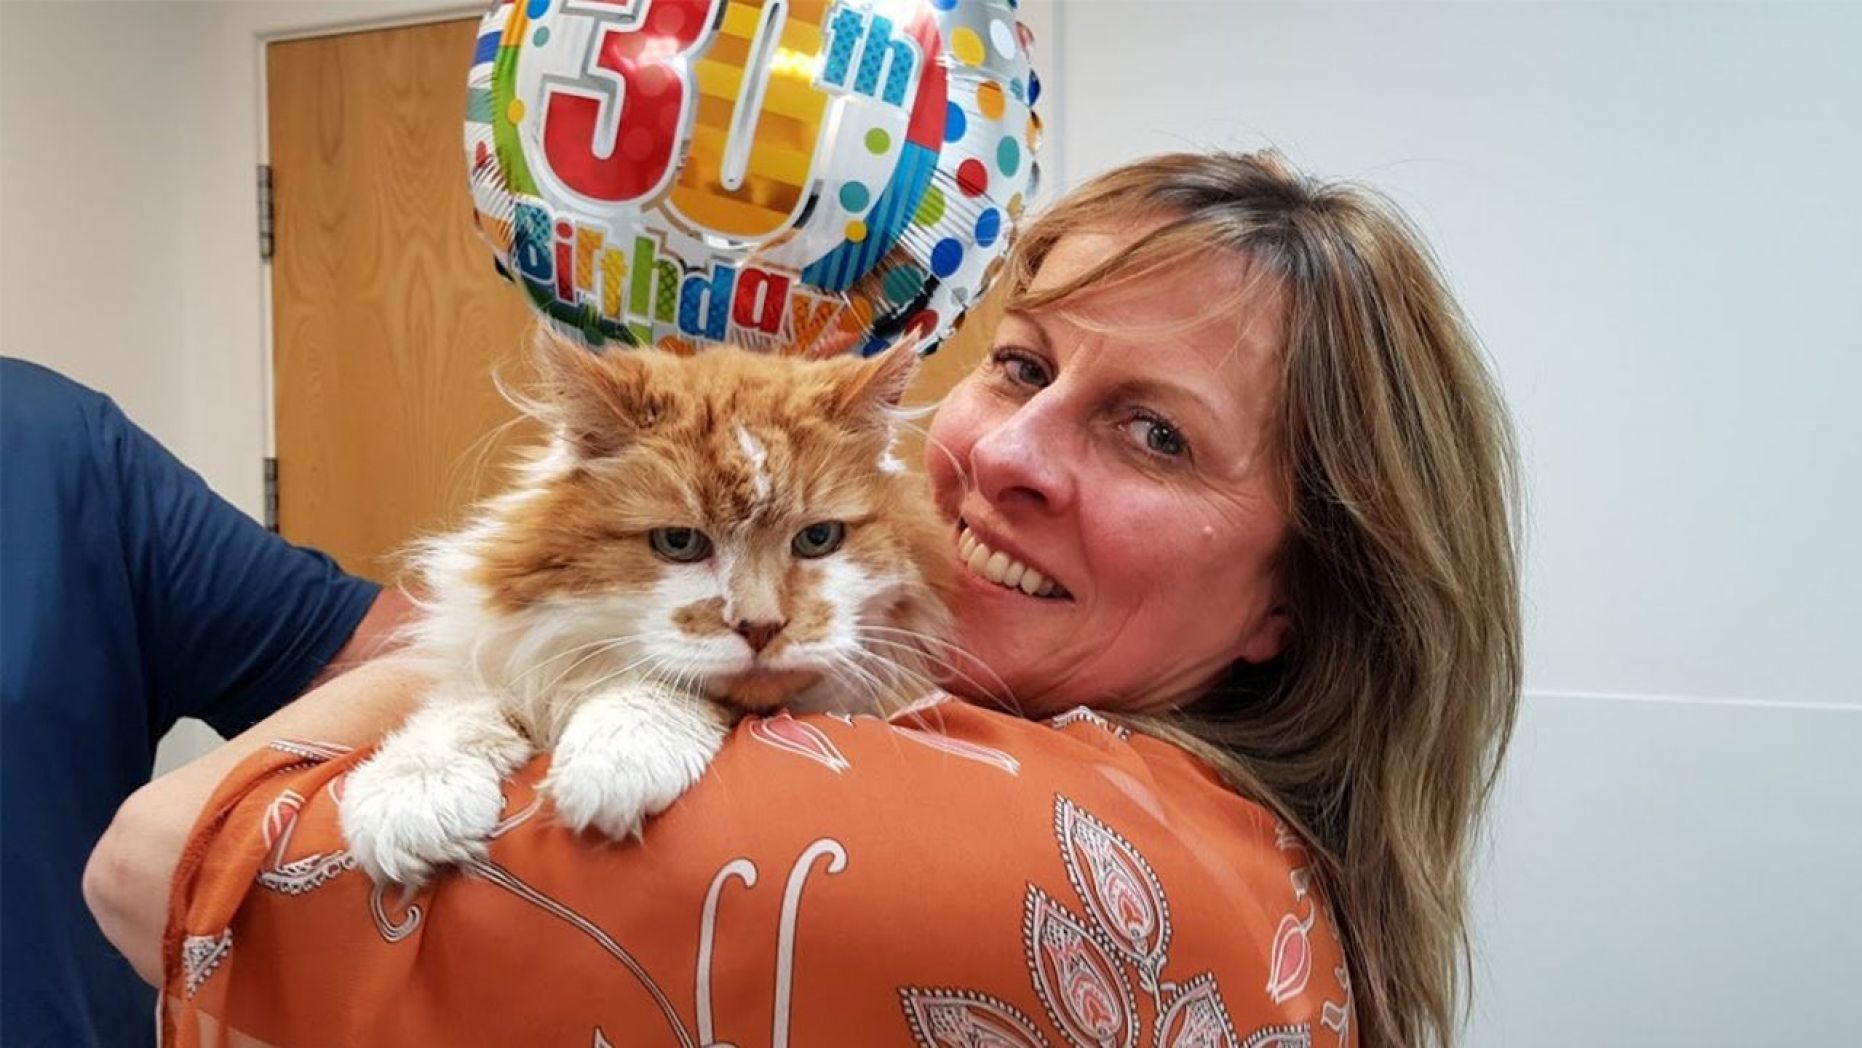 Rubble The Cat Celebrates 30th Birthday With Owner Since 1988 - WORLD OF BUZZ 1